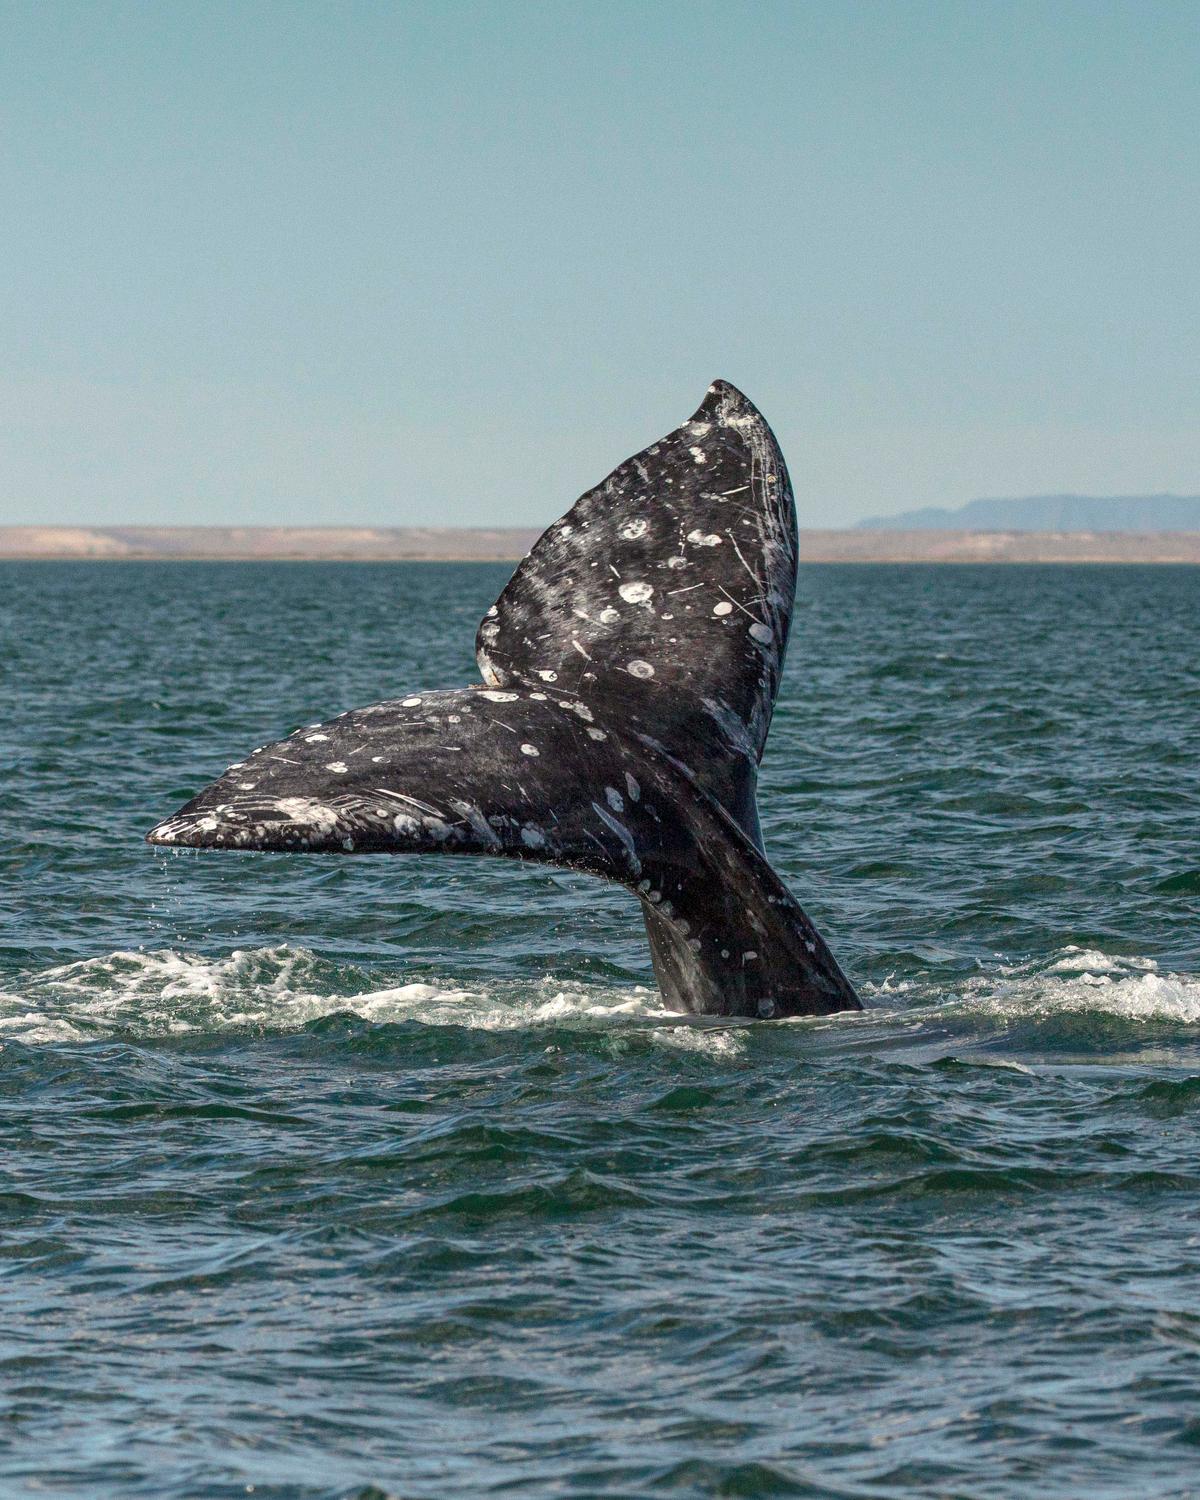 The tail end of a whale breaching. (Caters News)